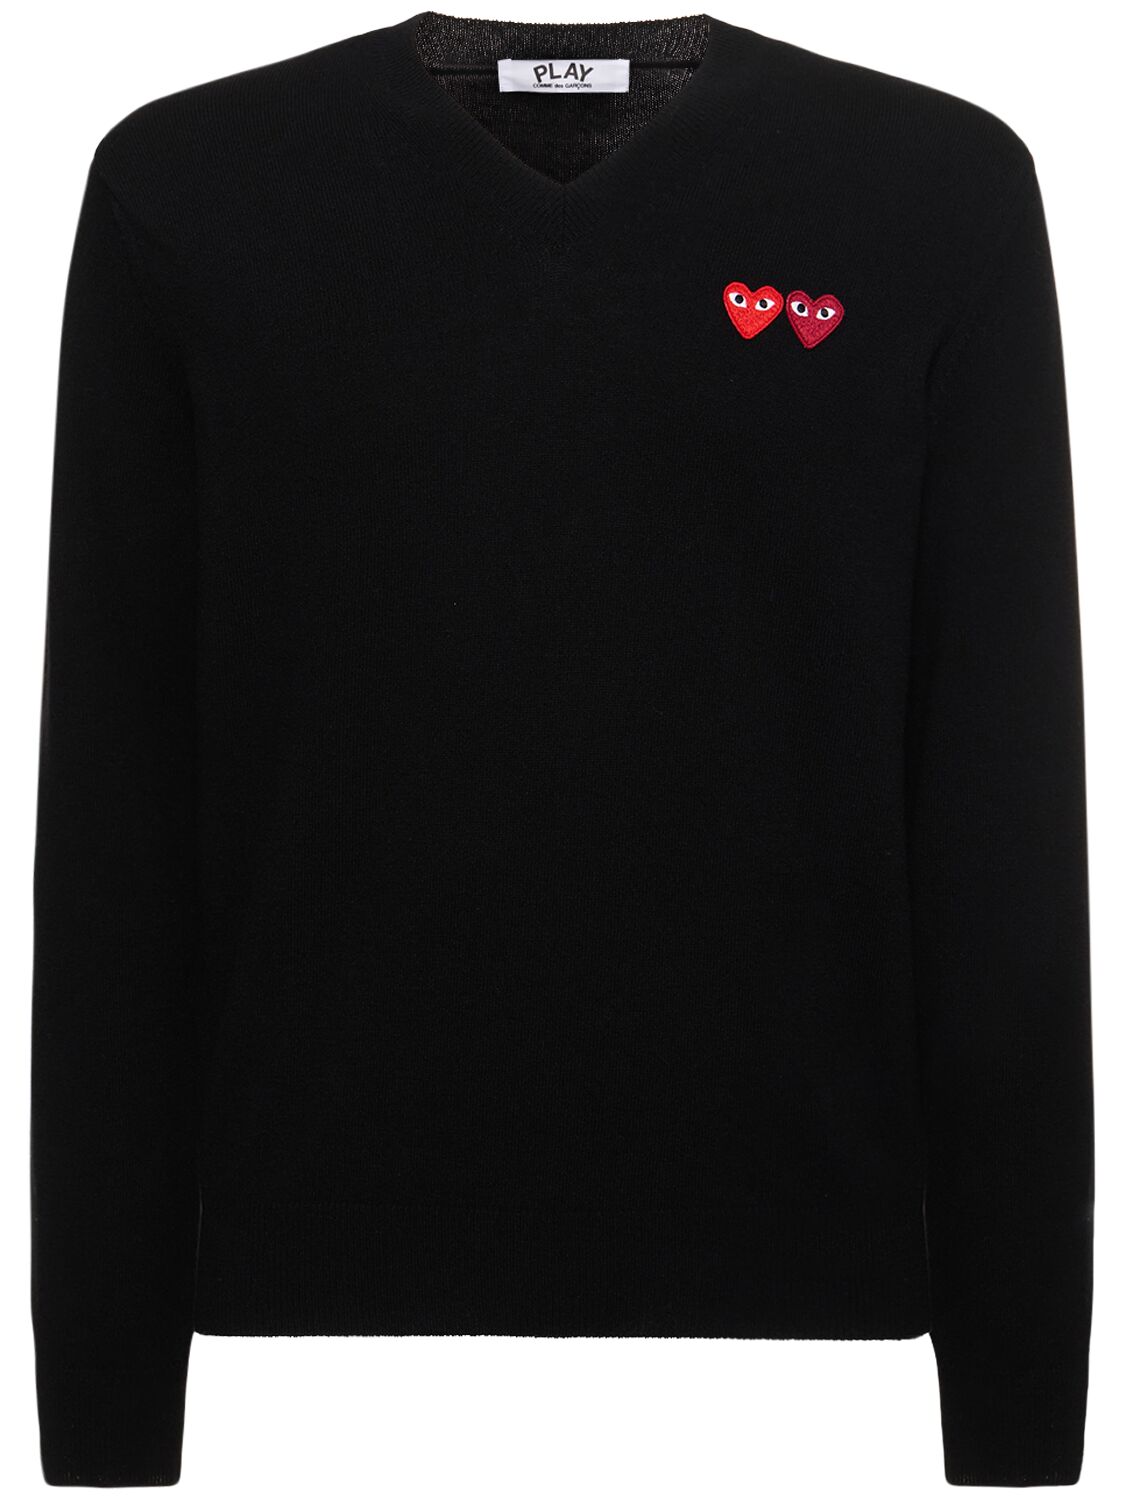 Image of Play Logo Knit Wool V-neck Sweater